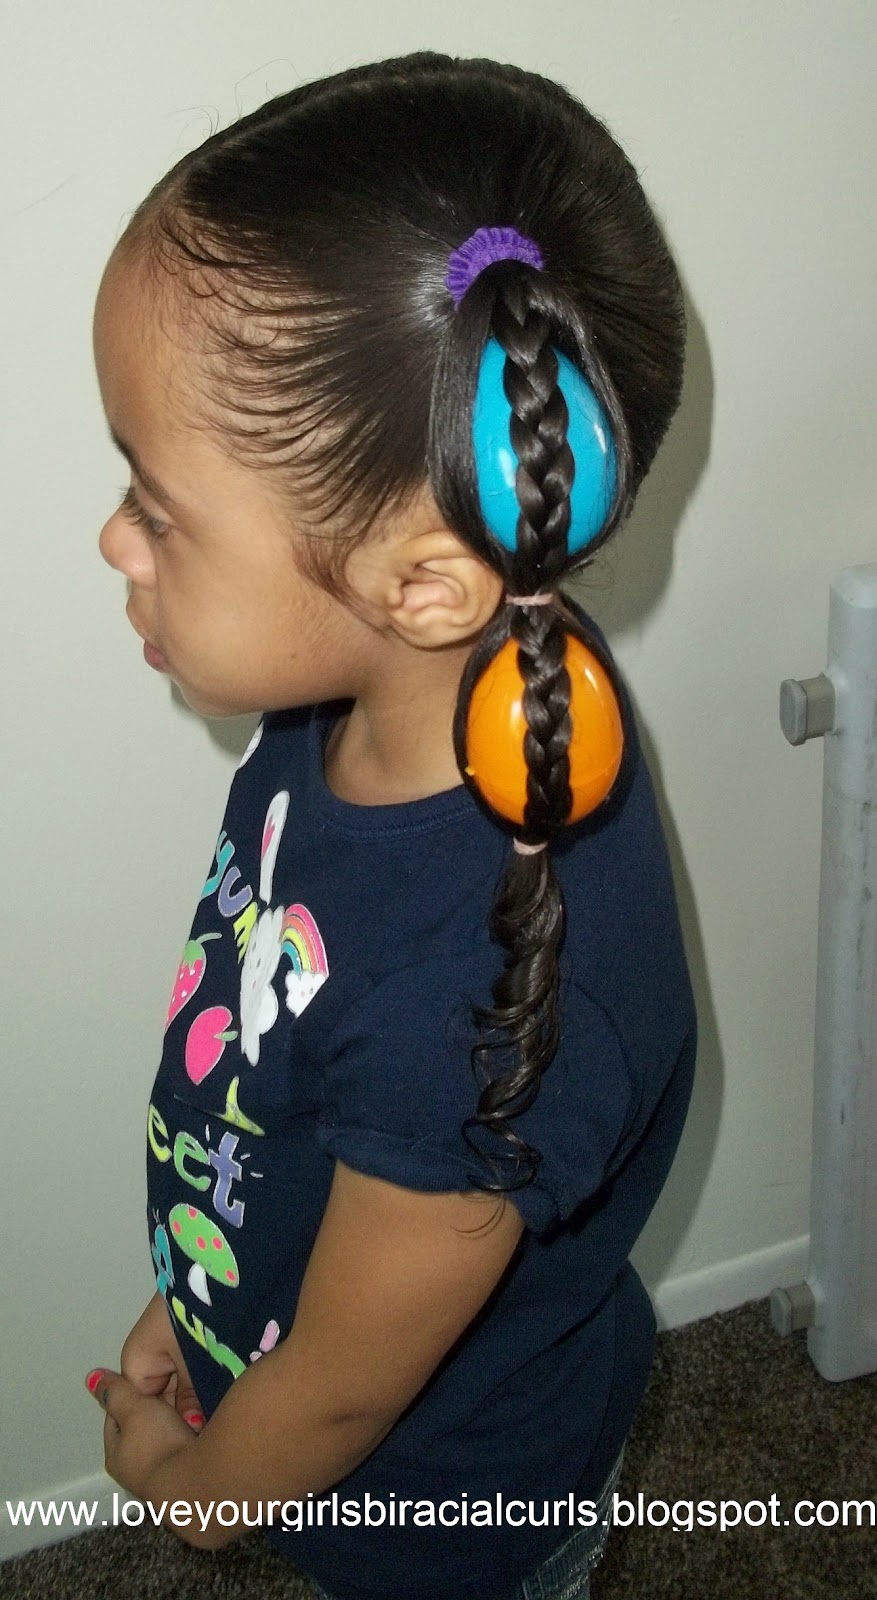 Love Your Girls Biracial Curls: Egg Tails Easter Hairstyle ...